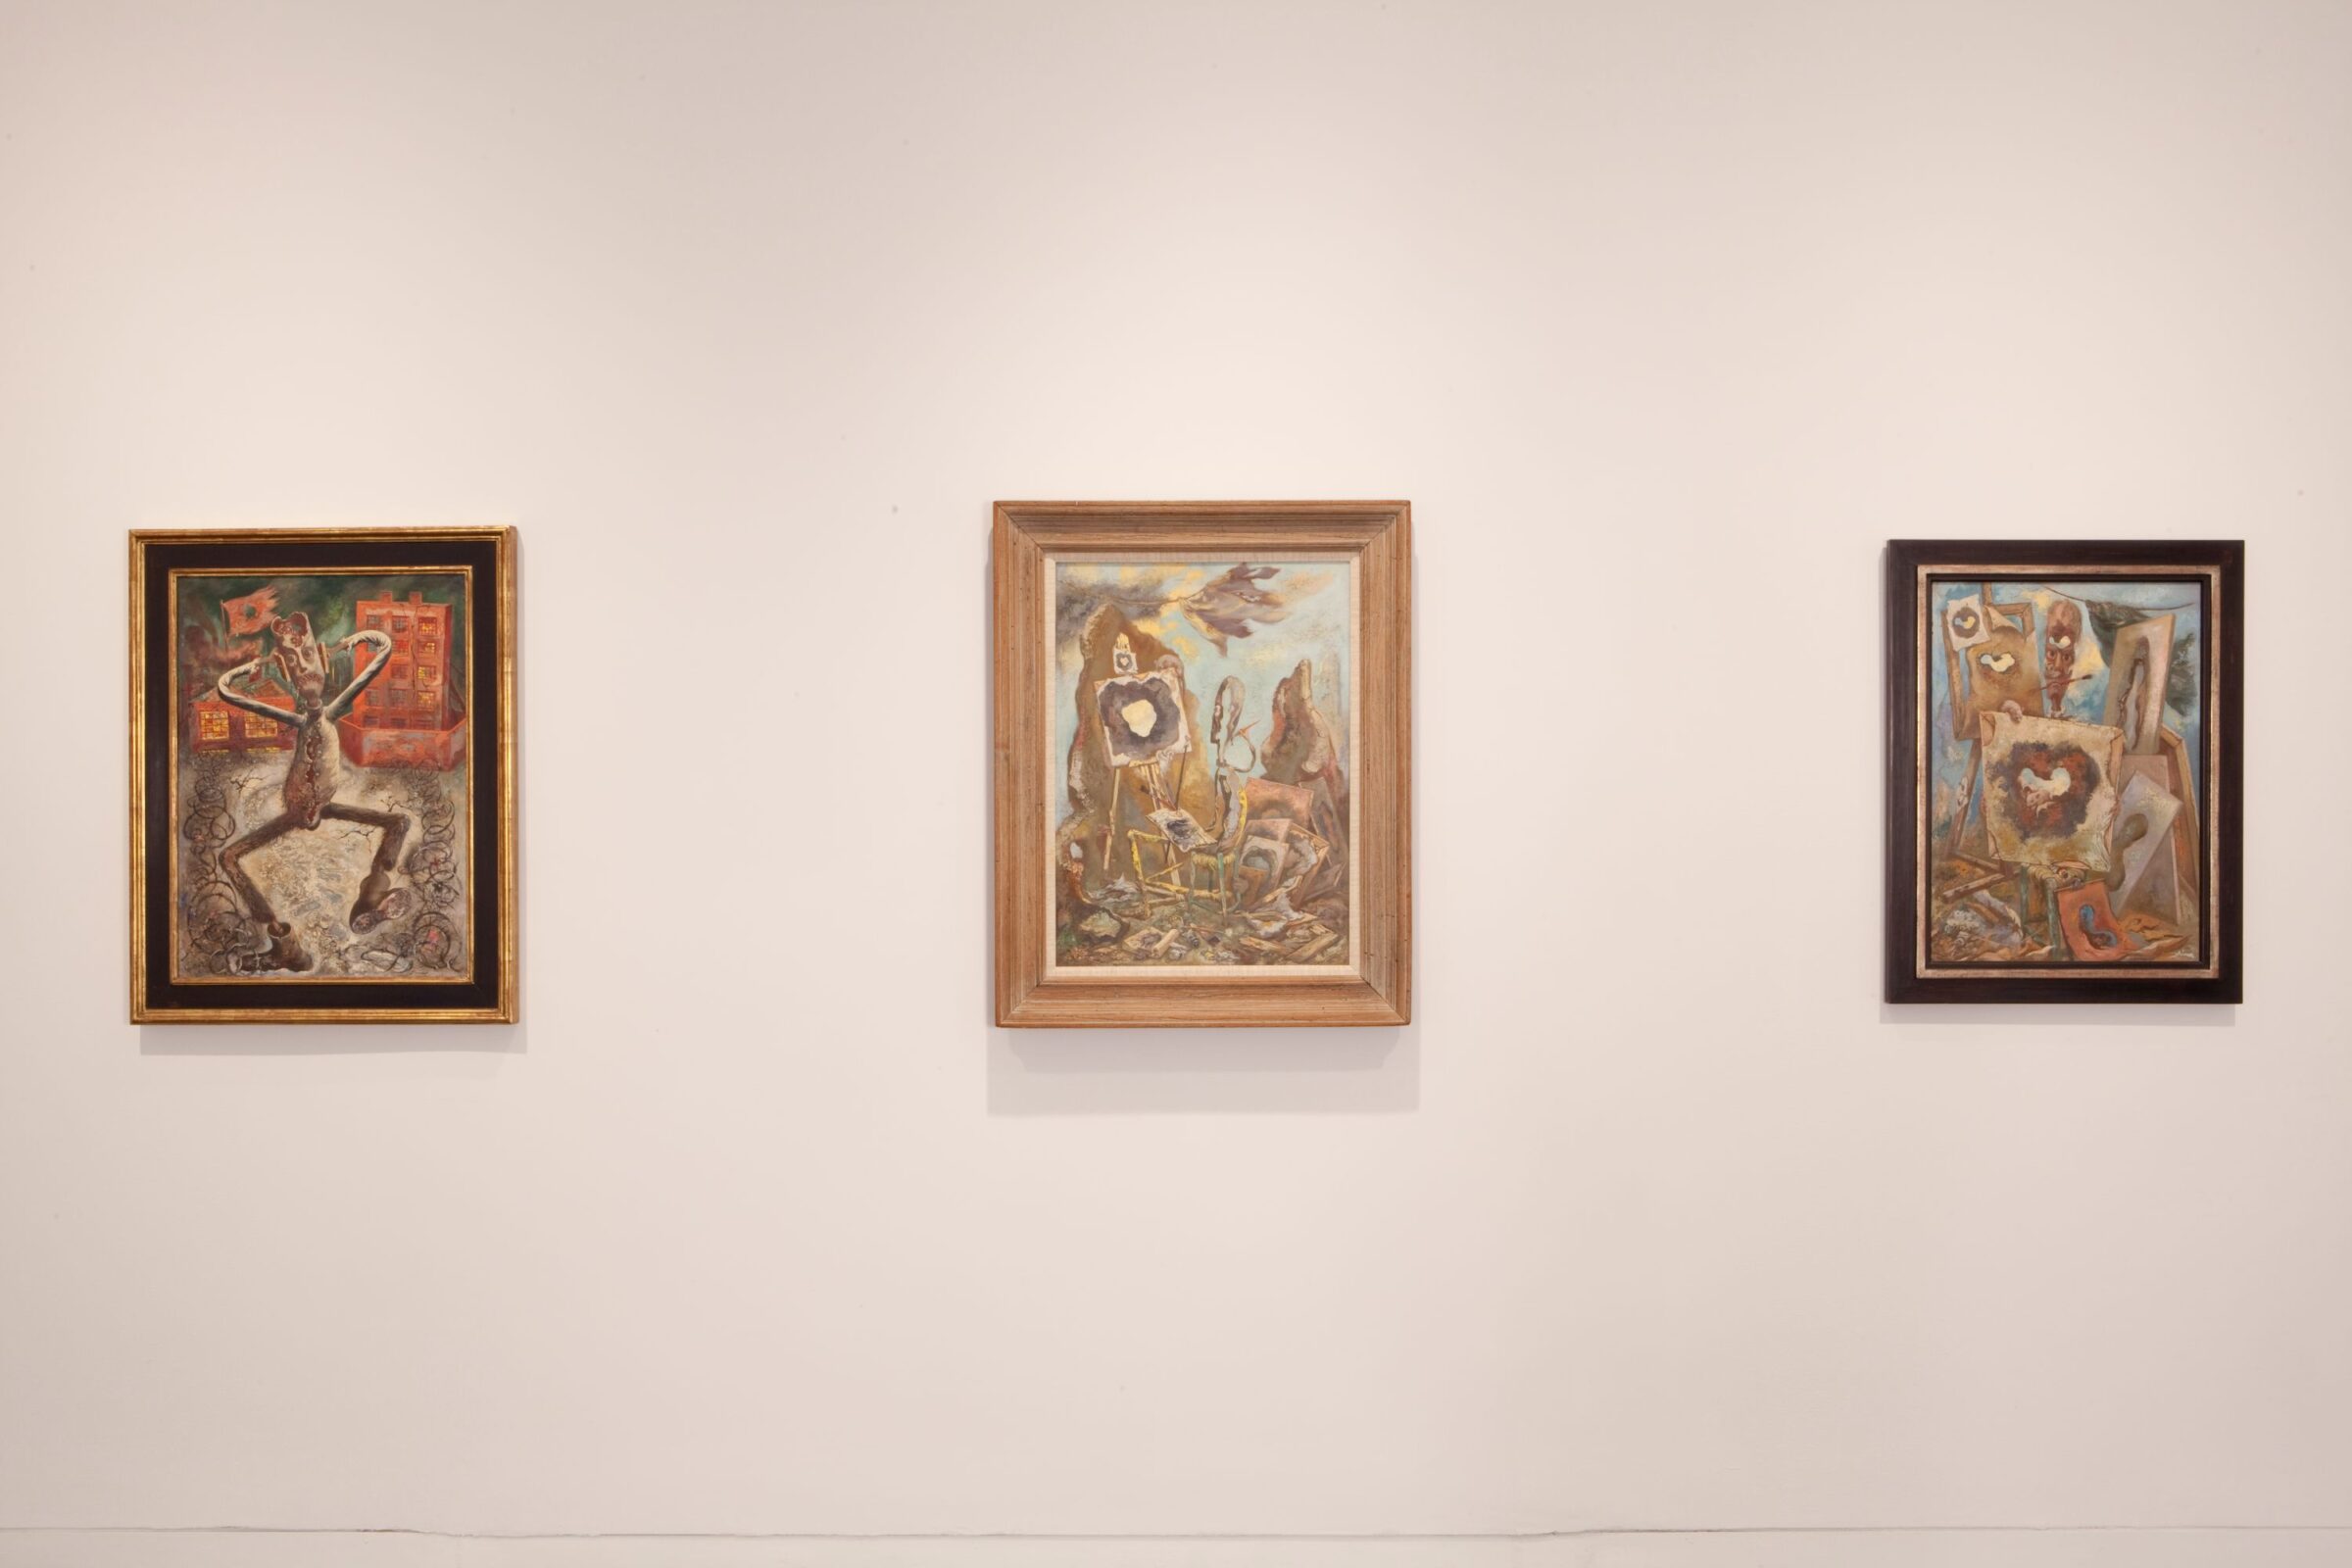 Three surrealist paintings of a figure in different frenzied scenes are framed and hanging in a row on a white gallery wall.